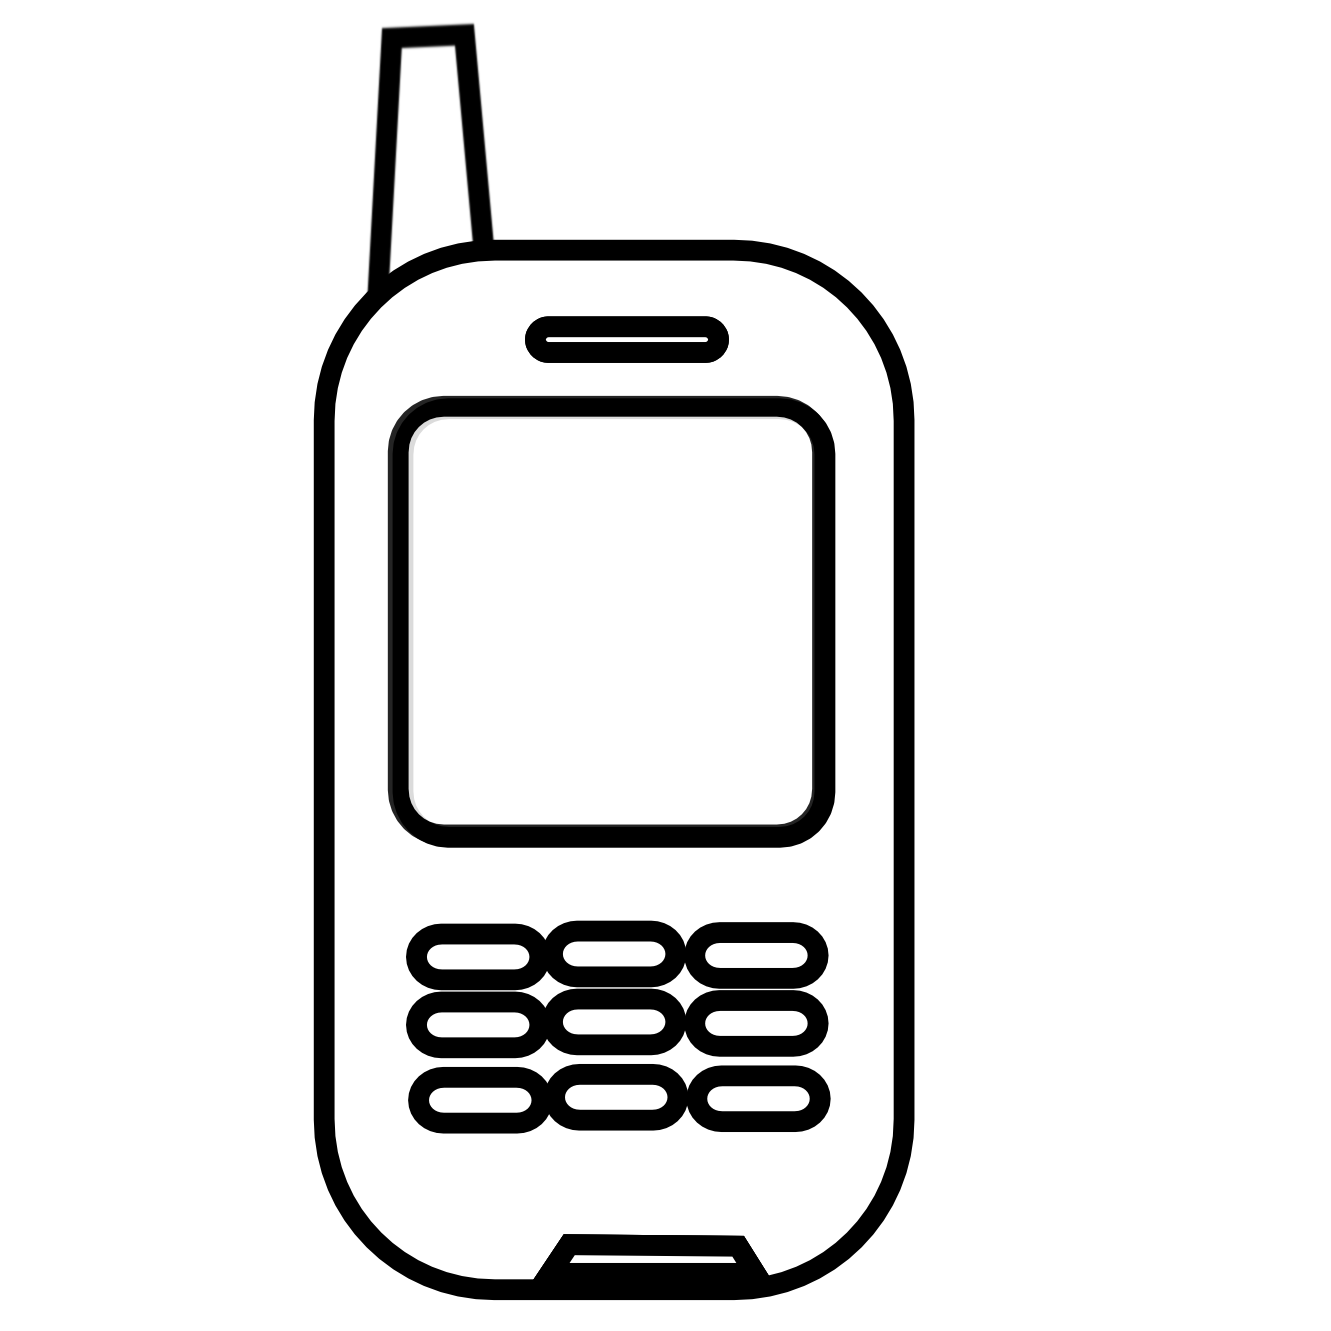 Cellphone clipart black and white. Cell phone clip art